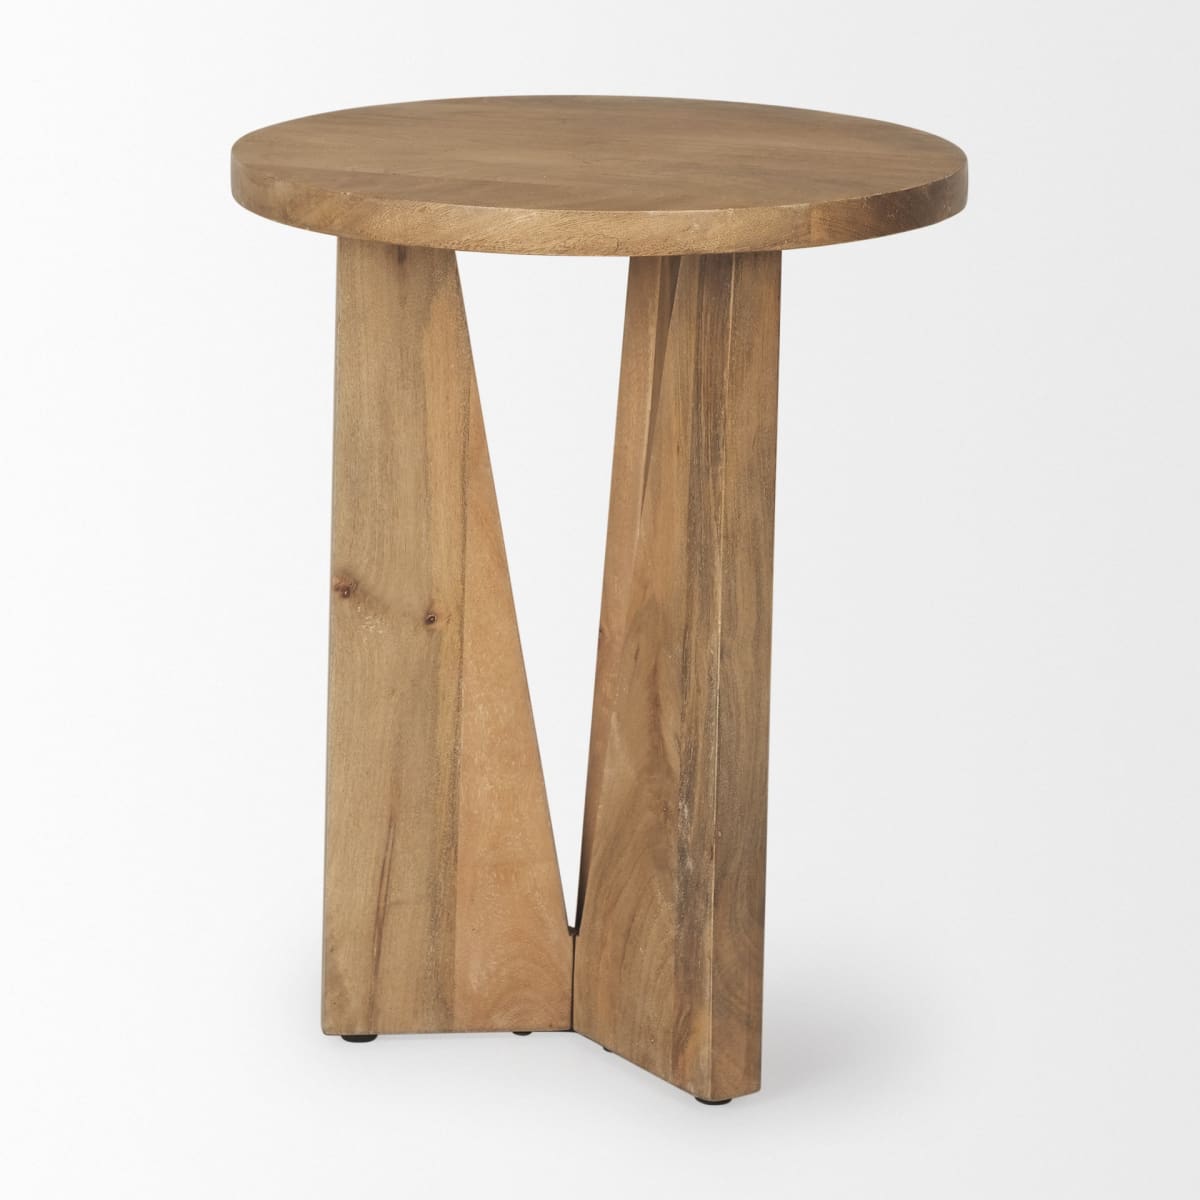 Mattius Accent Table Light Brown Wood - accent-tables